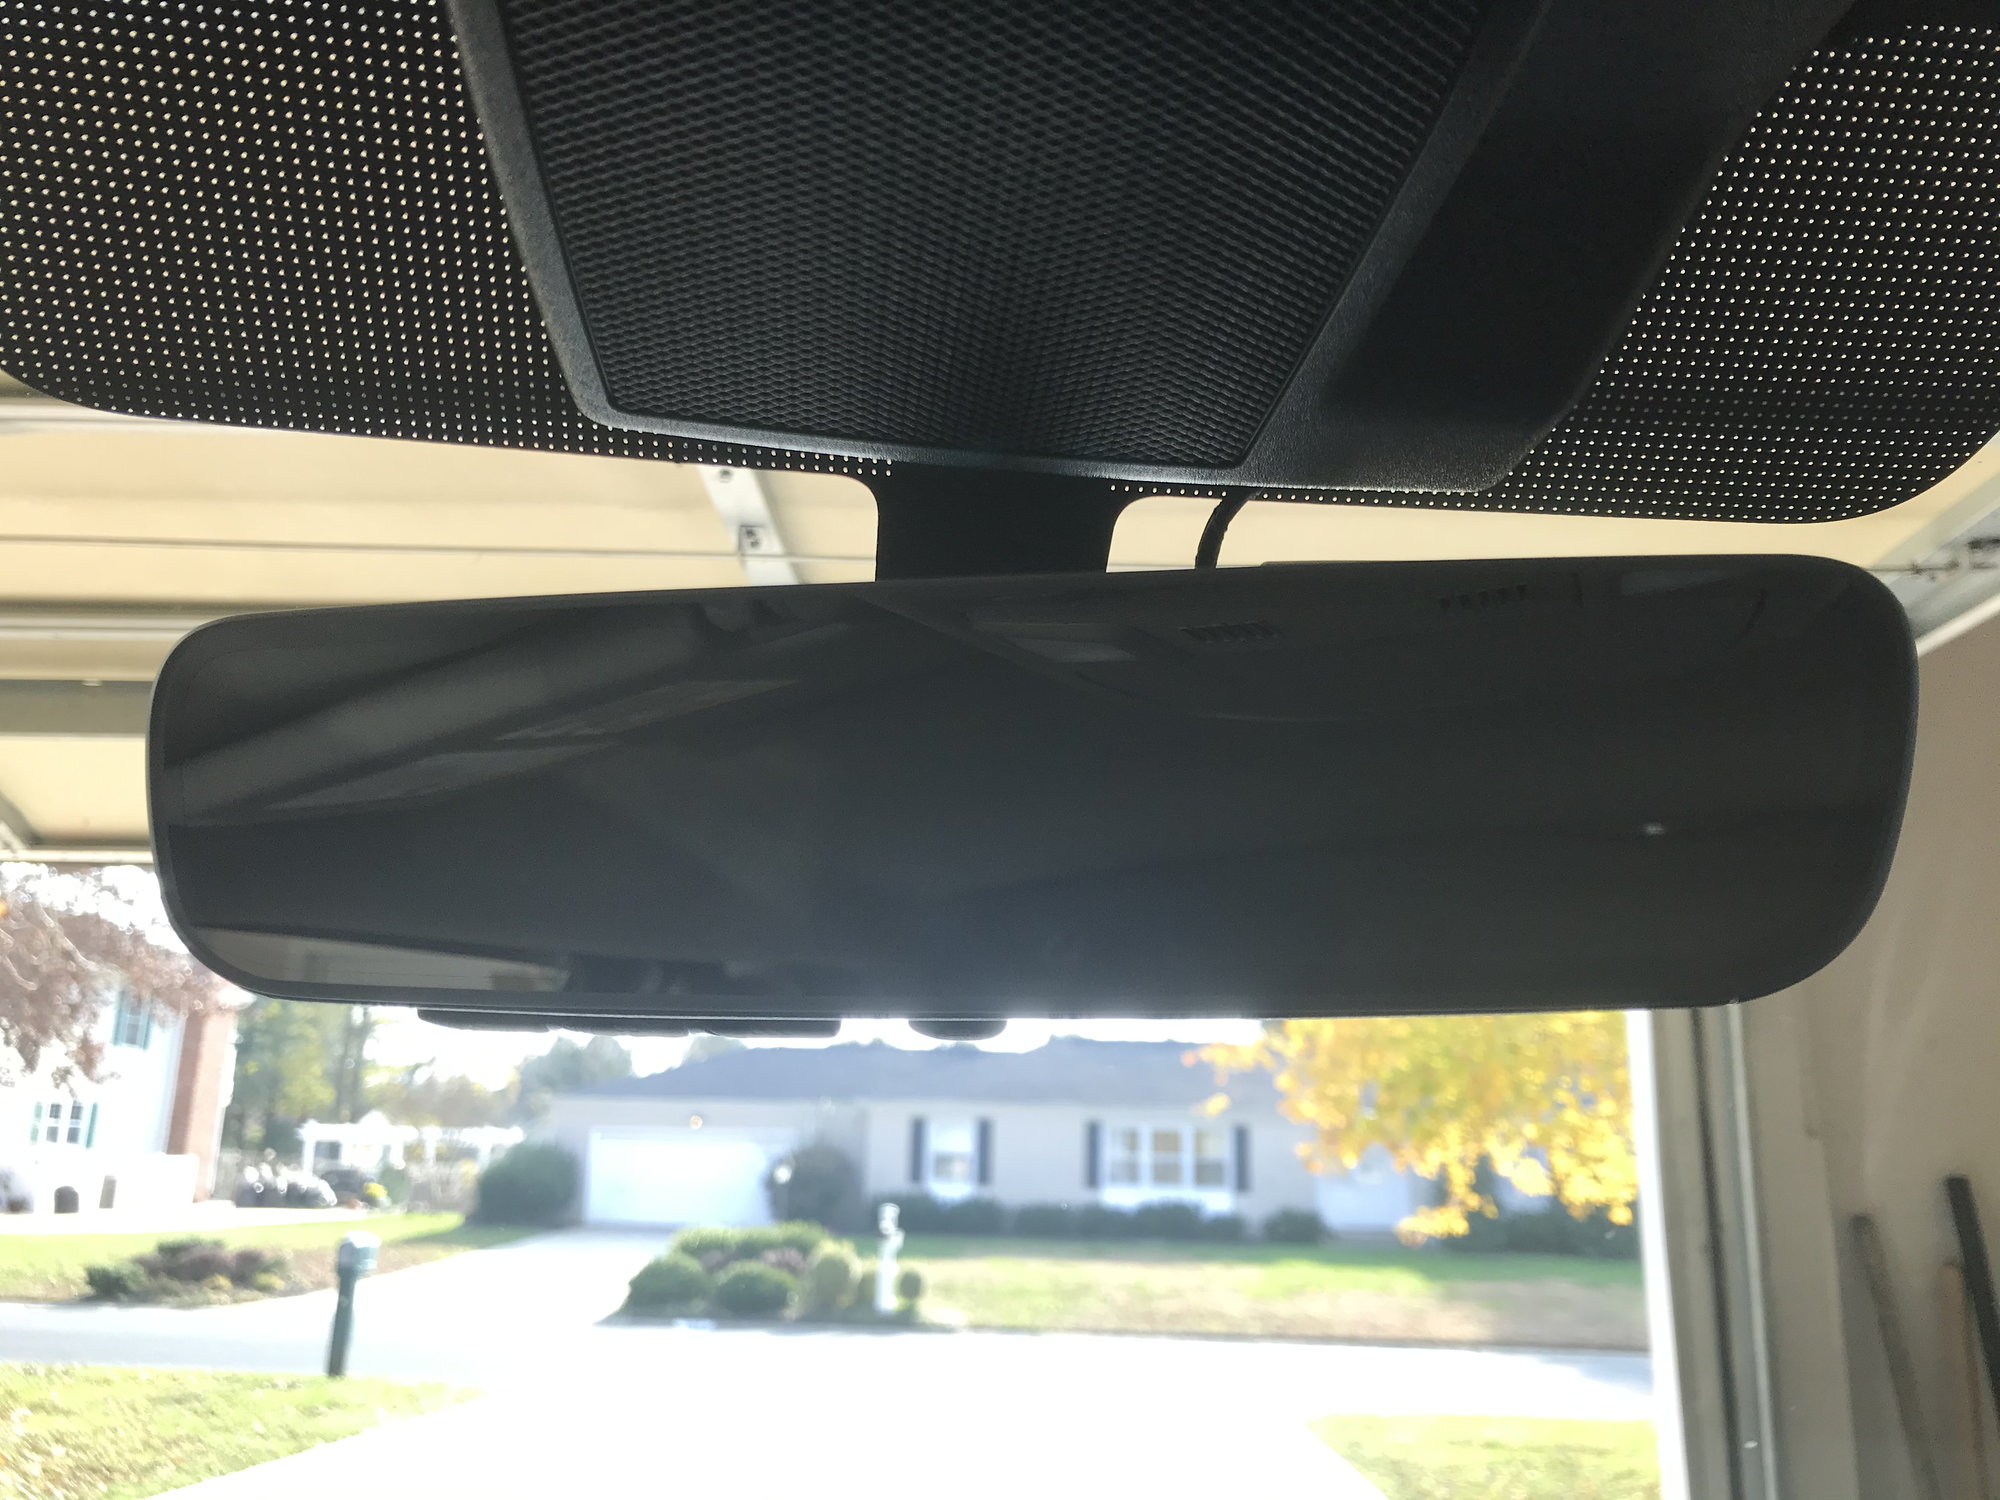 Adding Auto Dimming Rear View Mirror to 2020 STX - Ford F150 Forum - Community of Ford Truck Fans 2018 Ford F150 Auto Dimming Rear View Mirror